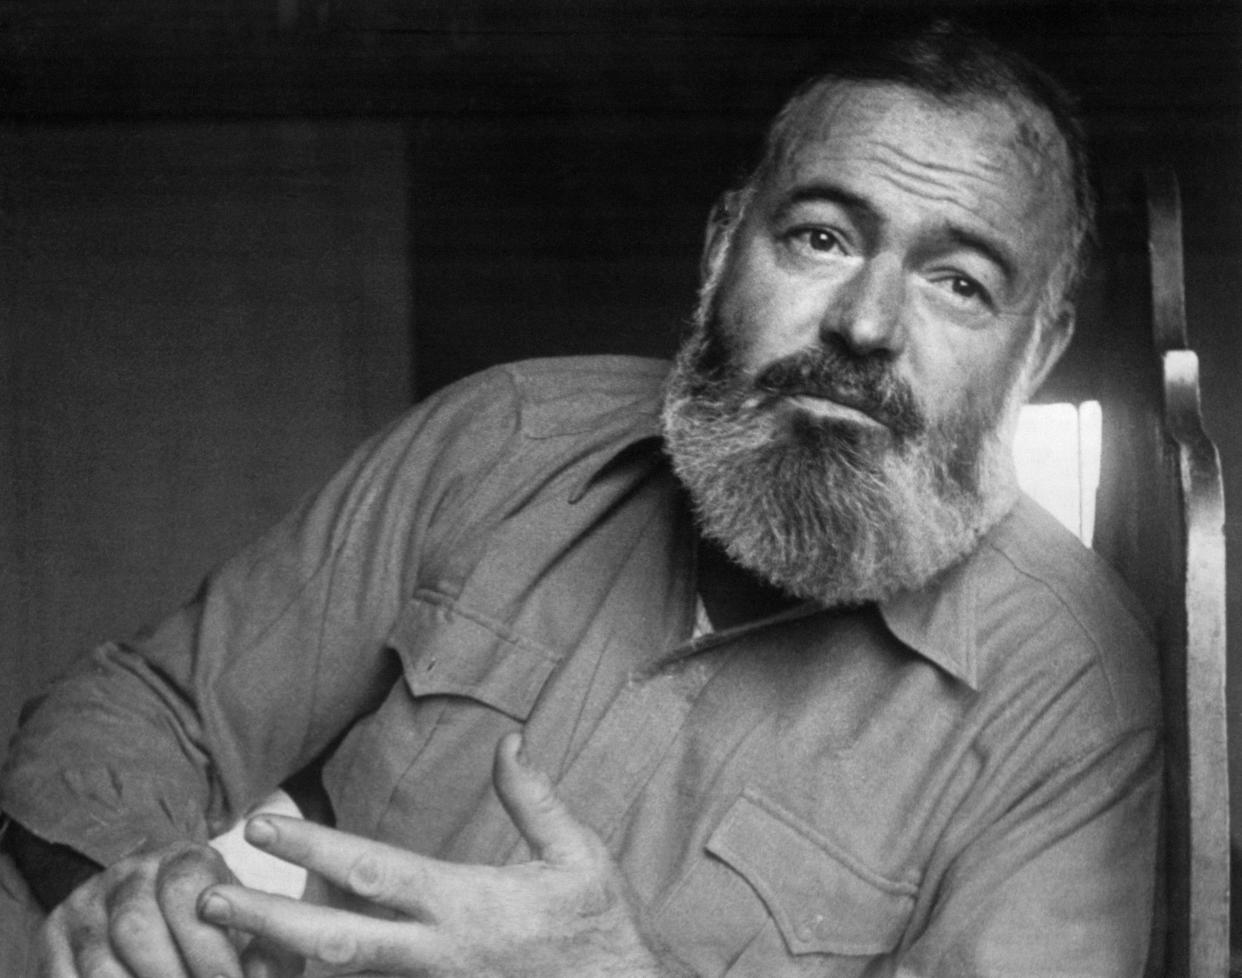 Portrait of Ernest Hemingway (1898-1961), American journalist, novelist, and short story writer. "Back home, I start work at five. I've been working since five. I like to start things early. It comes of living in the country."